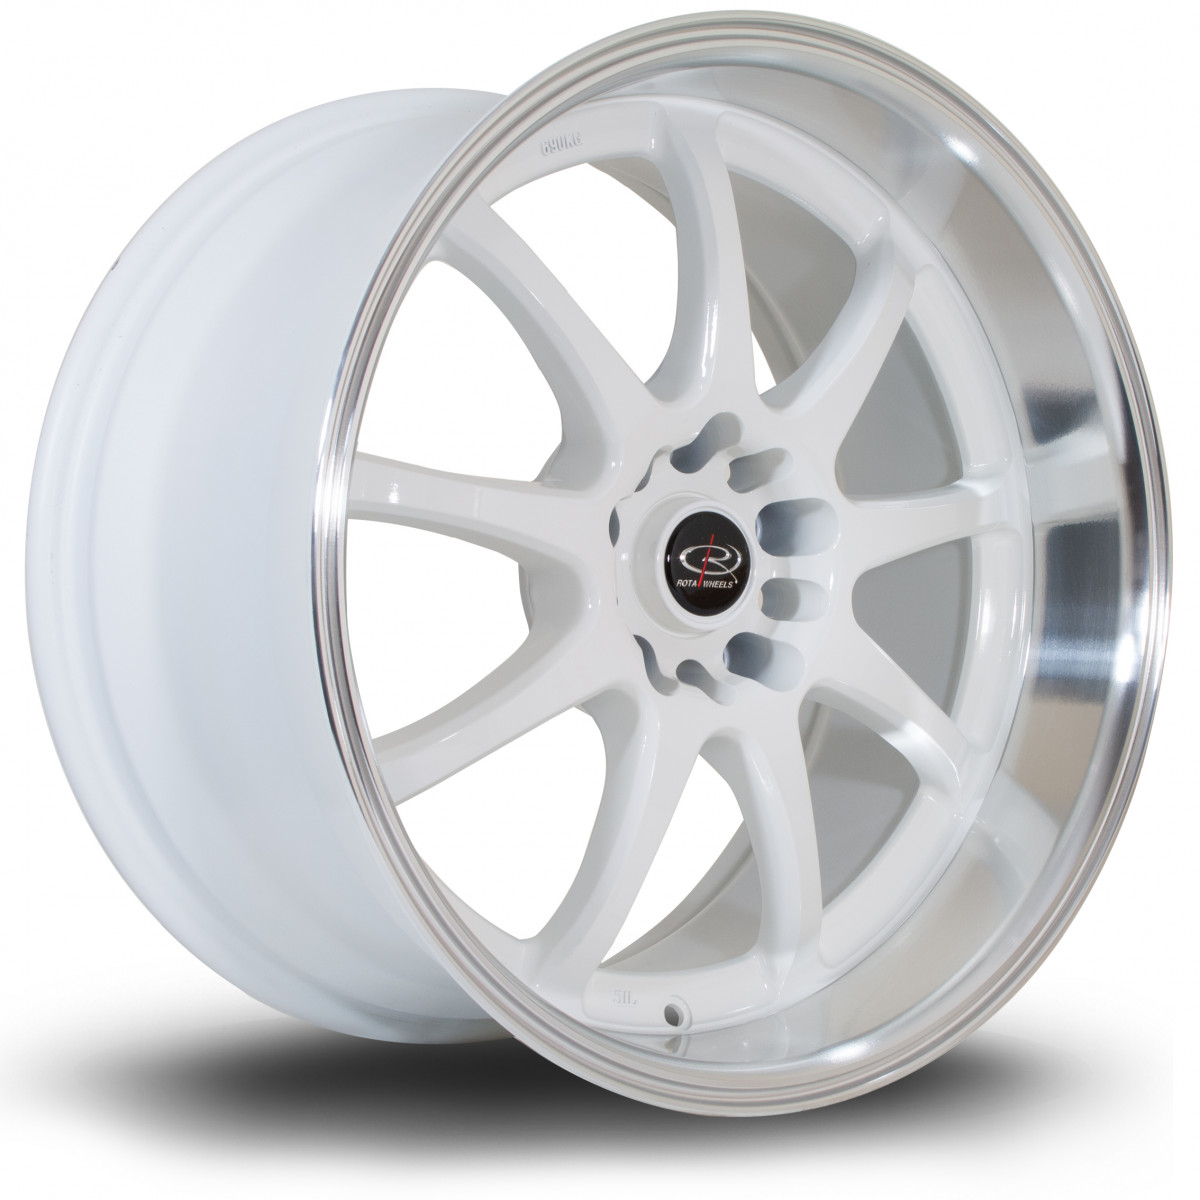 P1R 18x9.5 5x114 ET12 White with Polished Lip